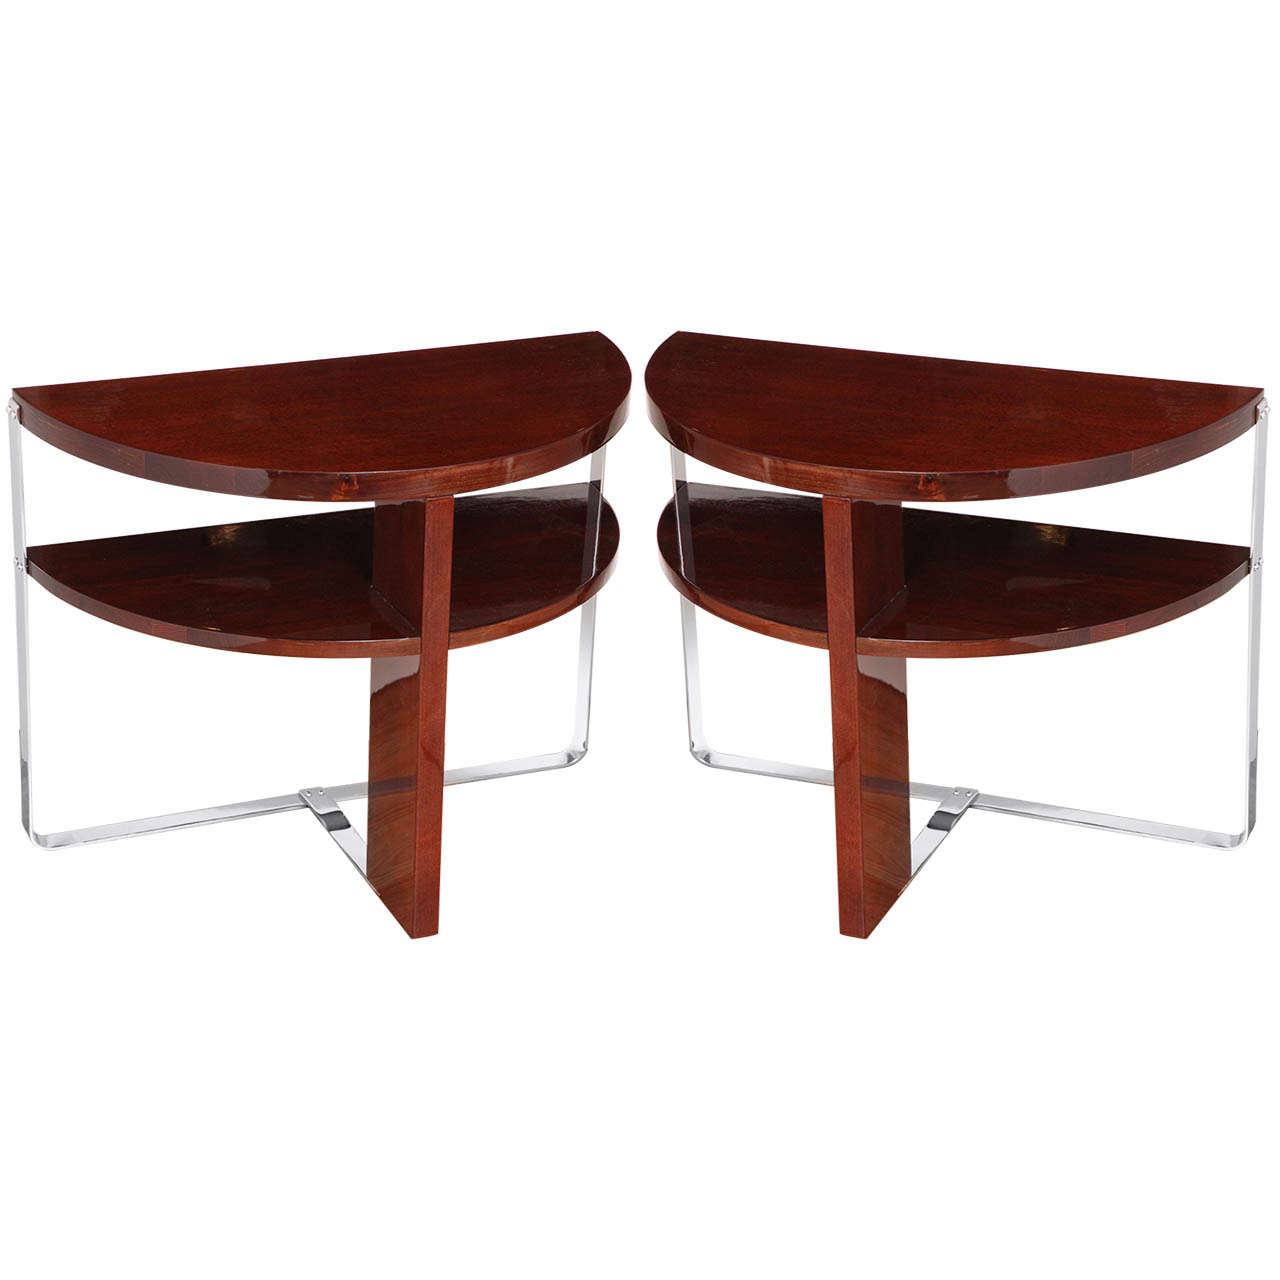 Pair of Machine Age Art Deco Side Tables in the Style of Donald Deskey